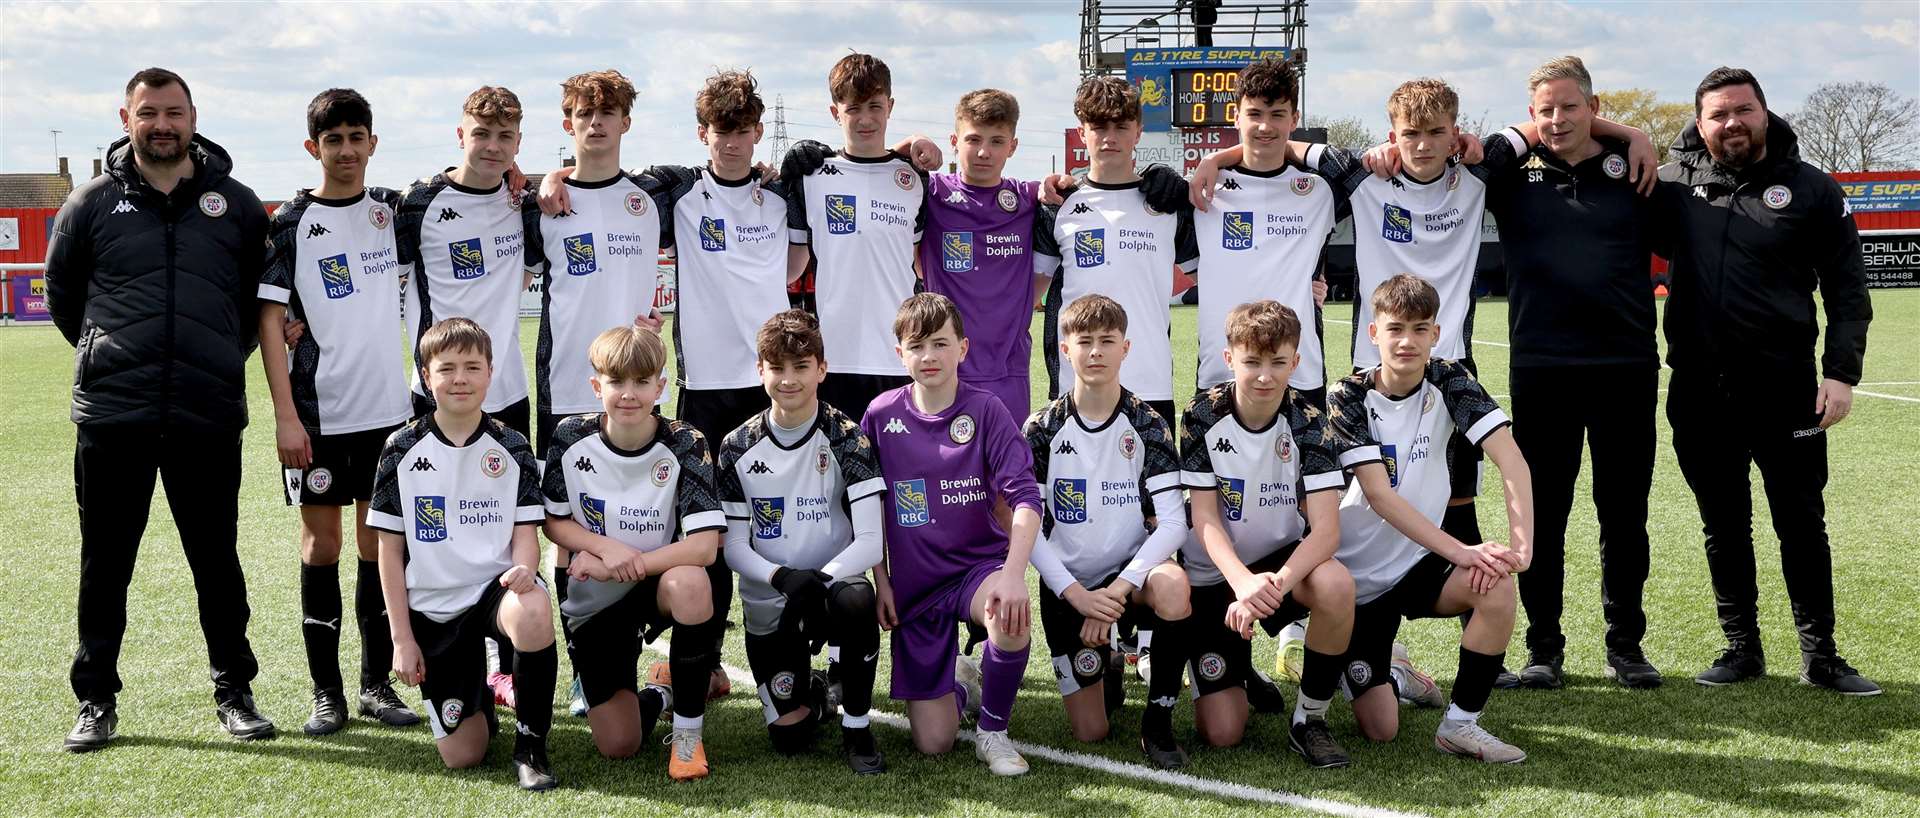 Bromley - defeated in the Kent Merit Under-14 Boys Cup Final. Picture: PSP Images